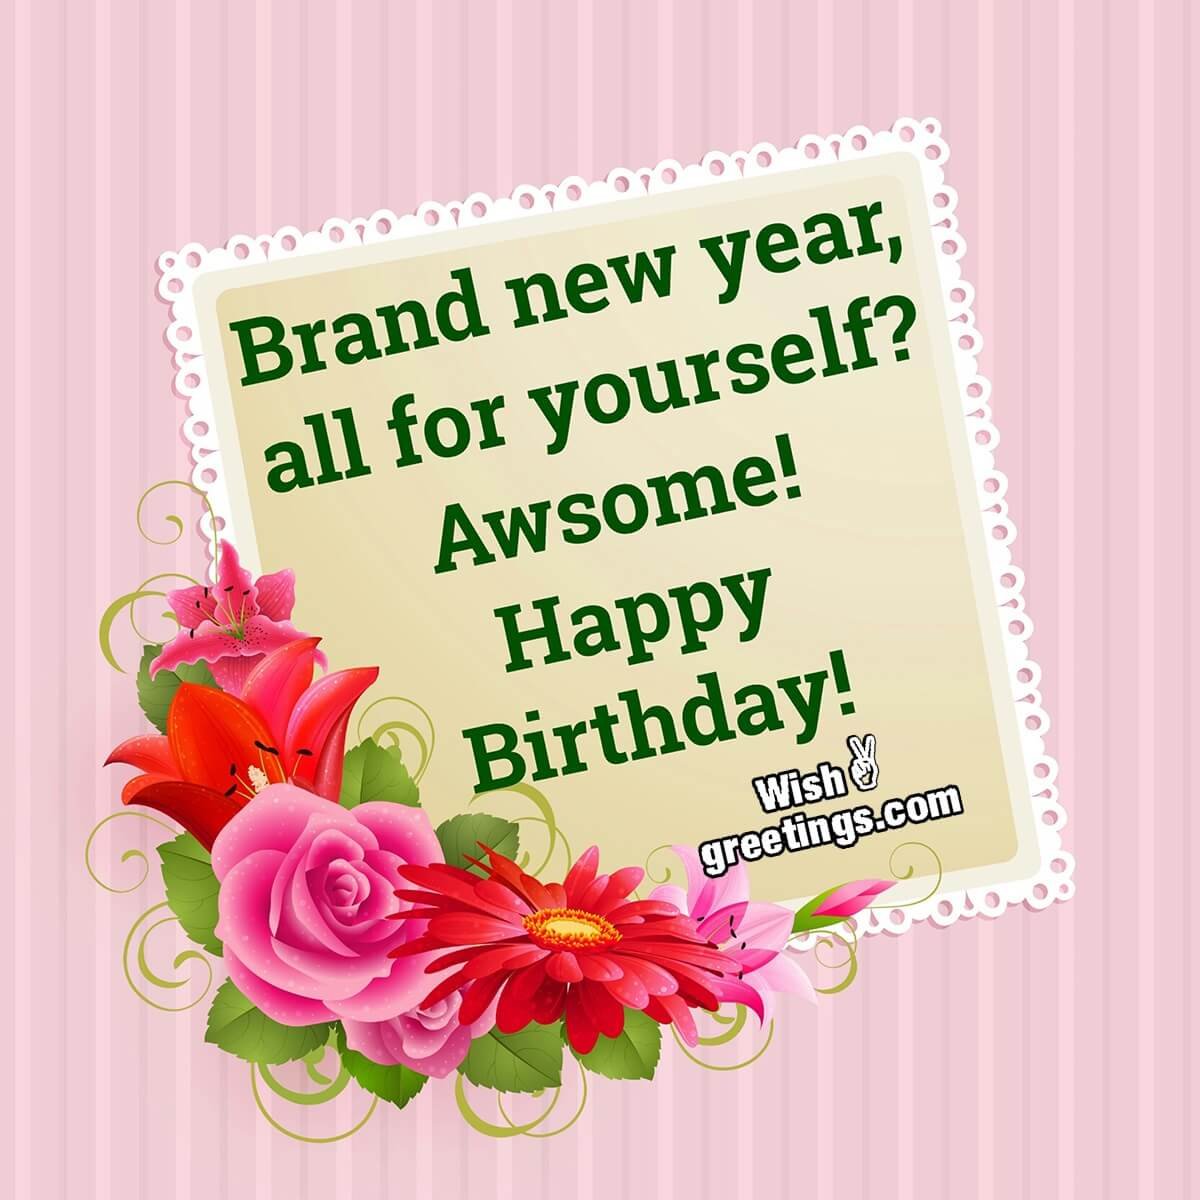 Happy Birthday For Your Brand New Year